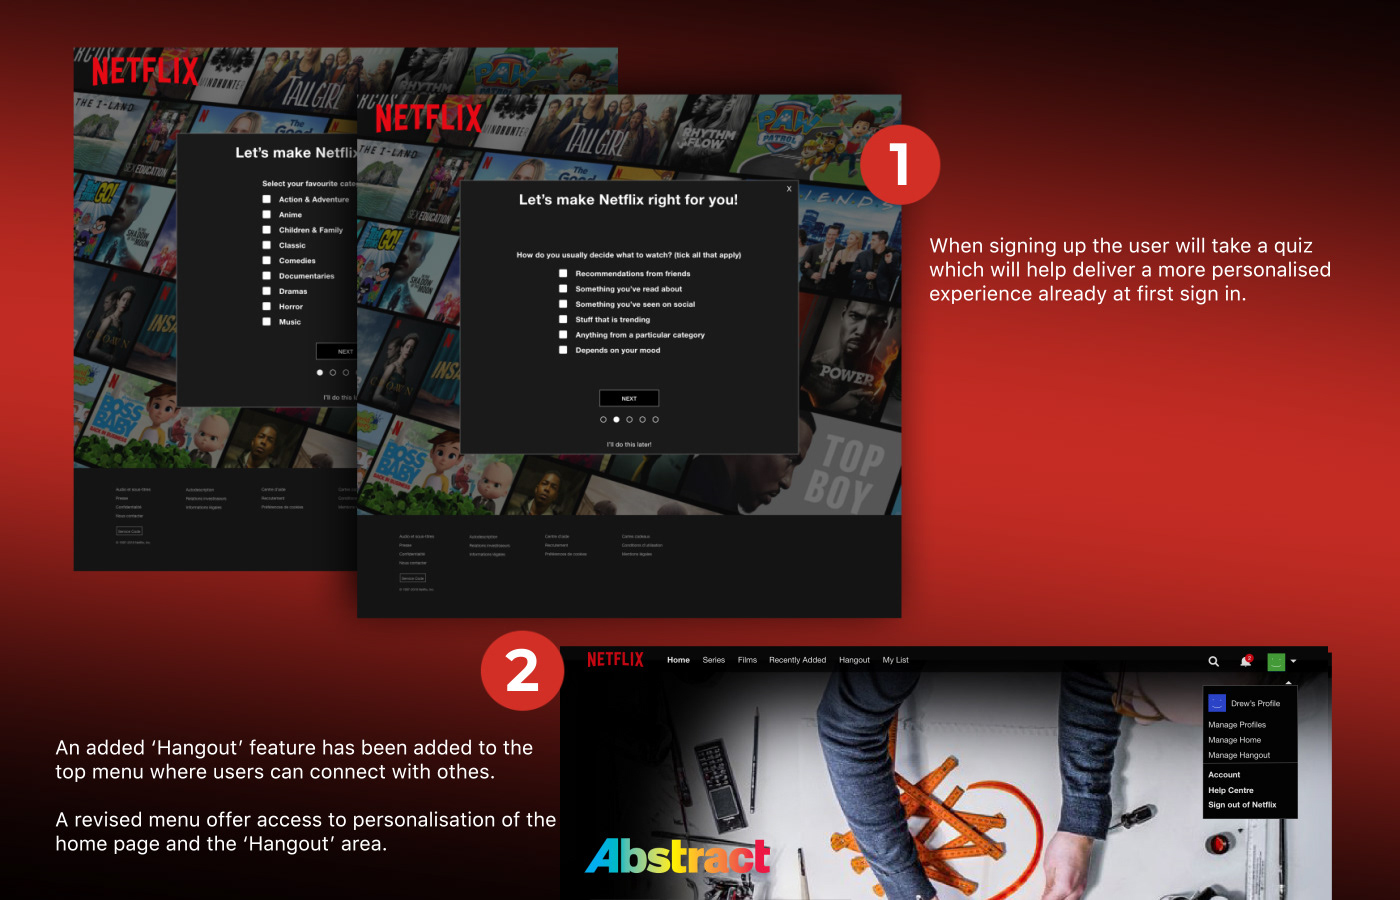 ux UI Interface Netflix Streaming User research Case Study user experience television Web Design 